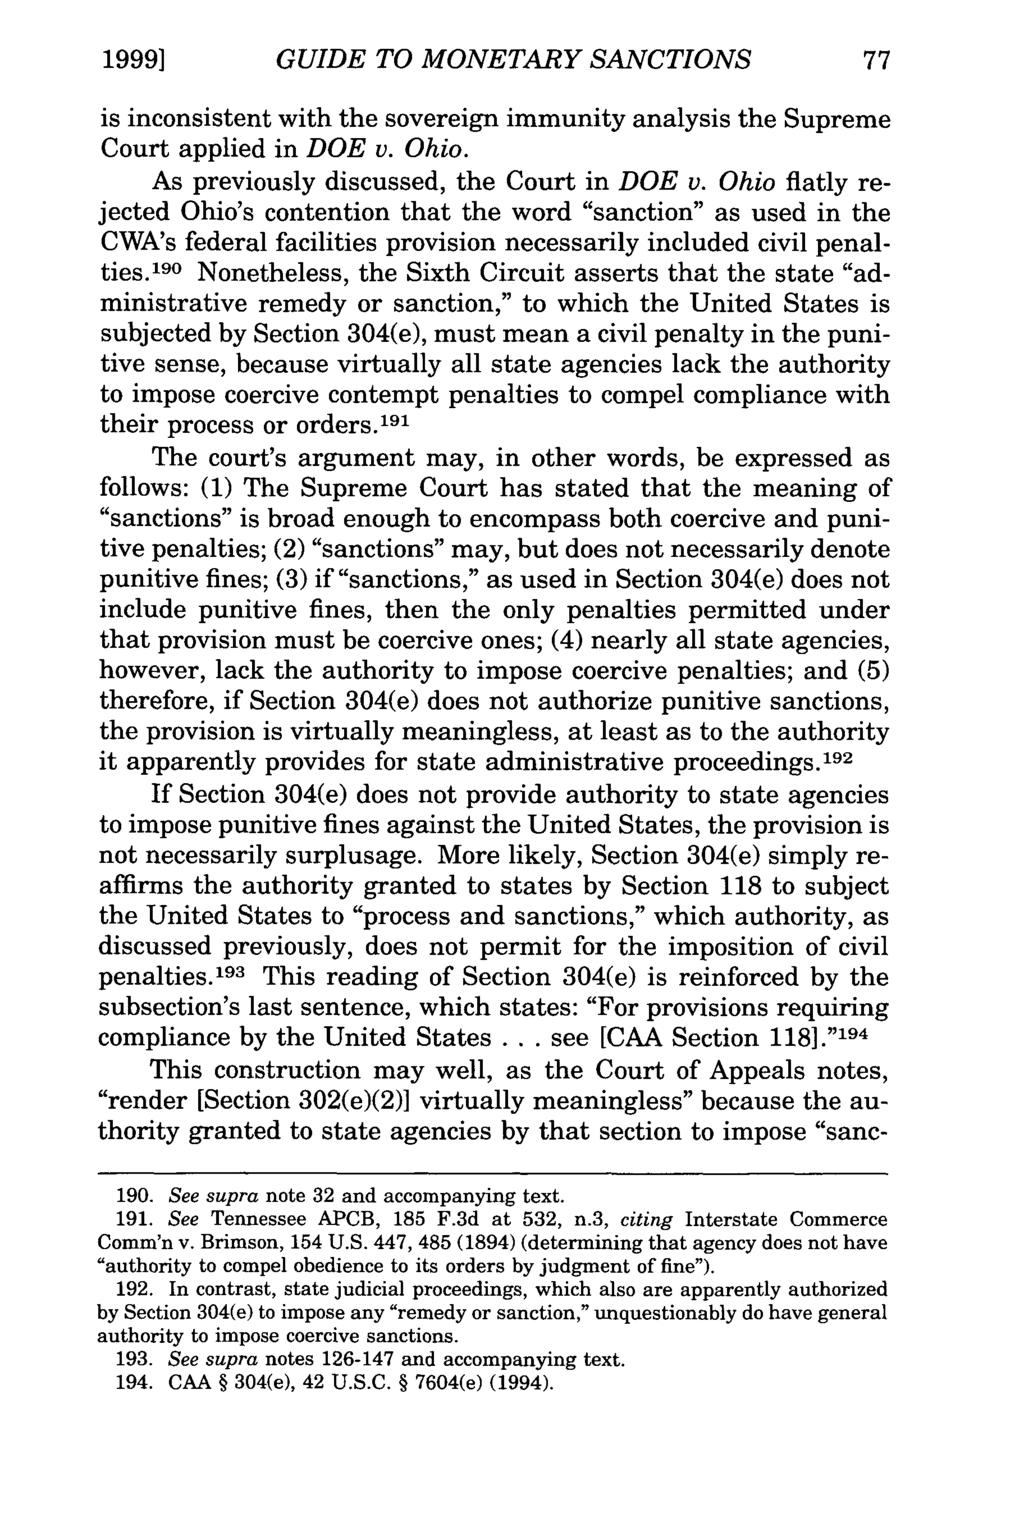 1999] GUIDE TO MONETARY SANCTIONS is inconsistent with the sovereign immunity analysis the Supreme Court applied in DOE v. Ohio. As previously discussed, the Court in DOE v.